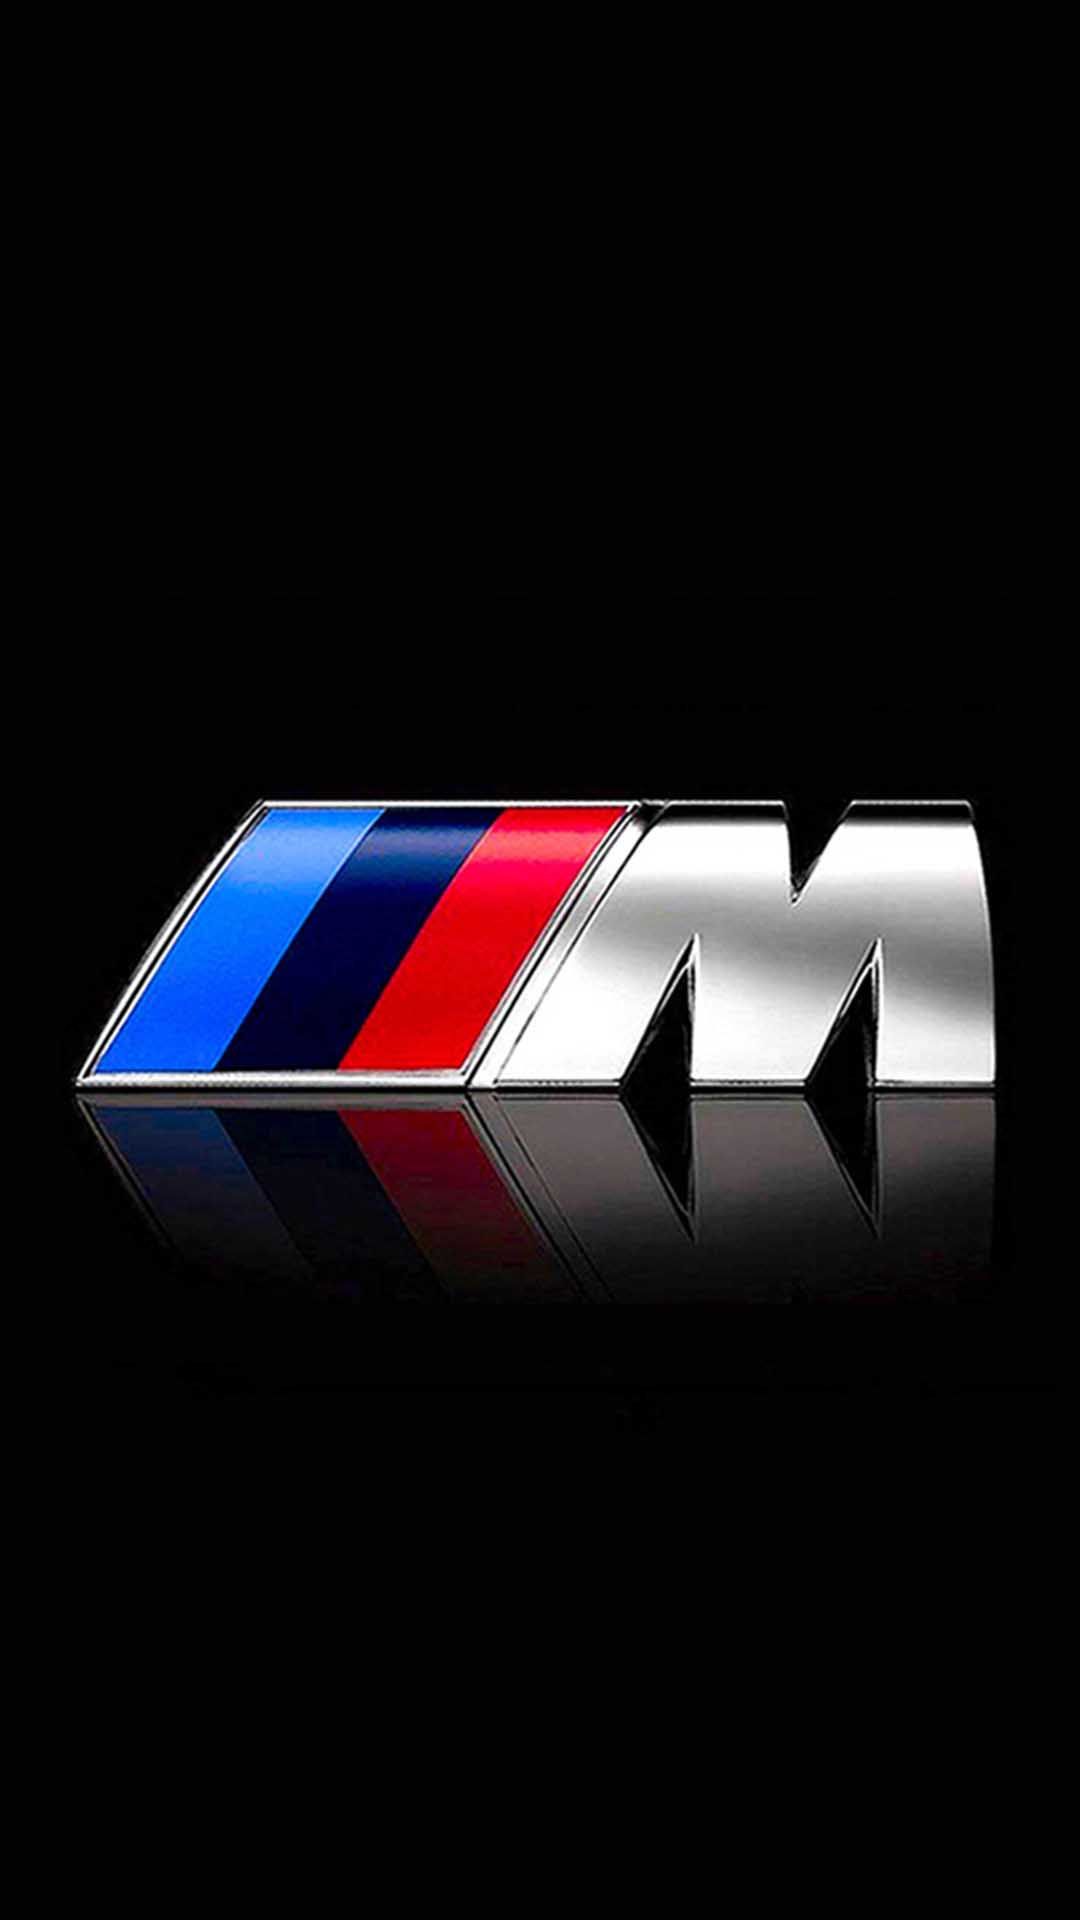 BMW Wallpaper for iPhone X, 6